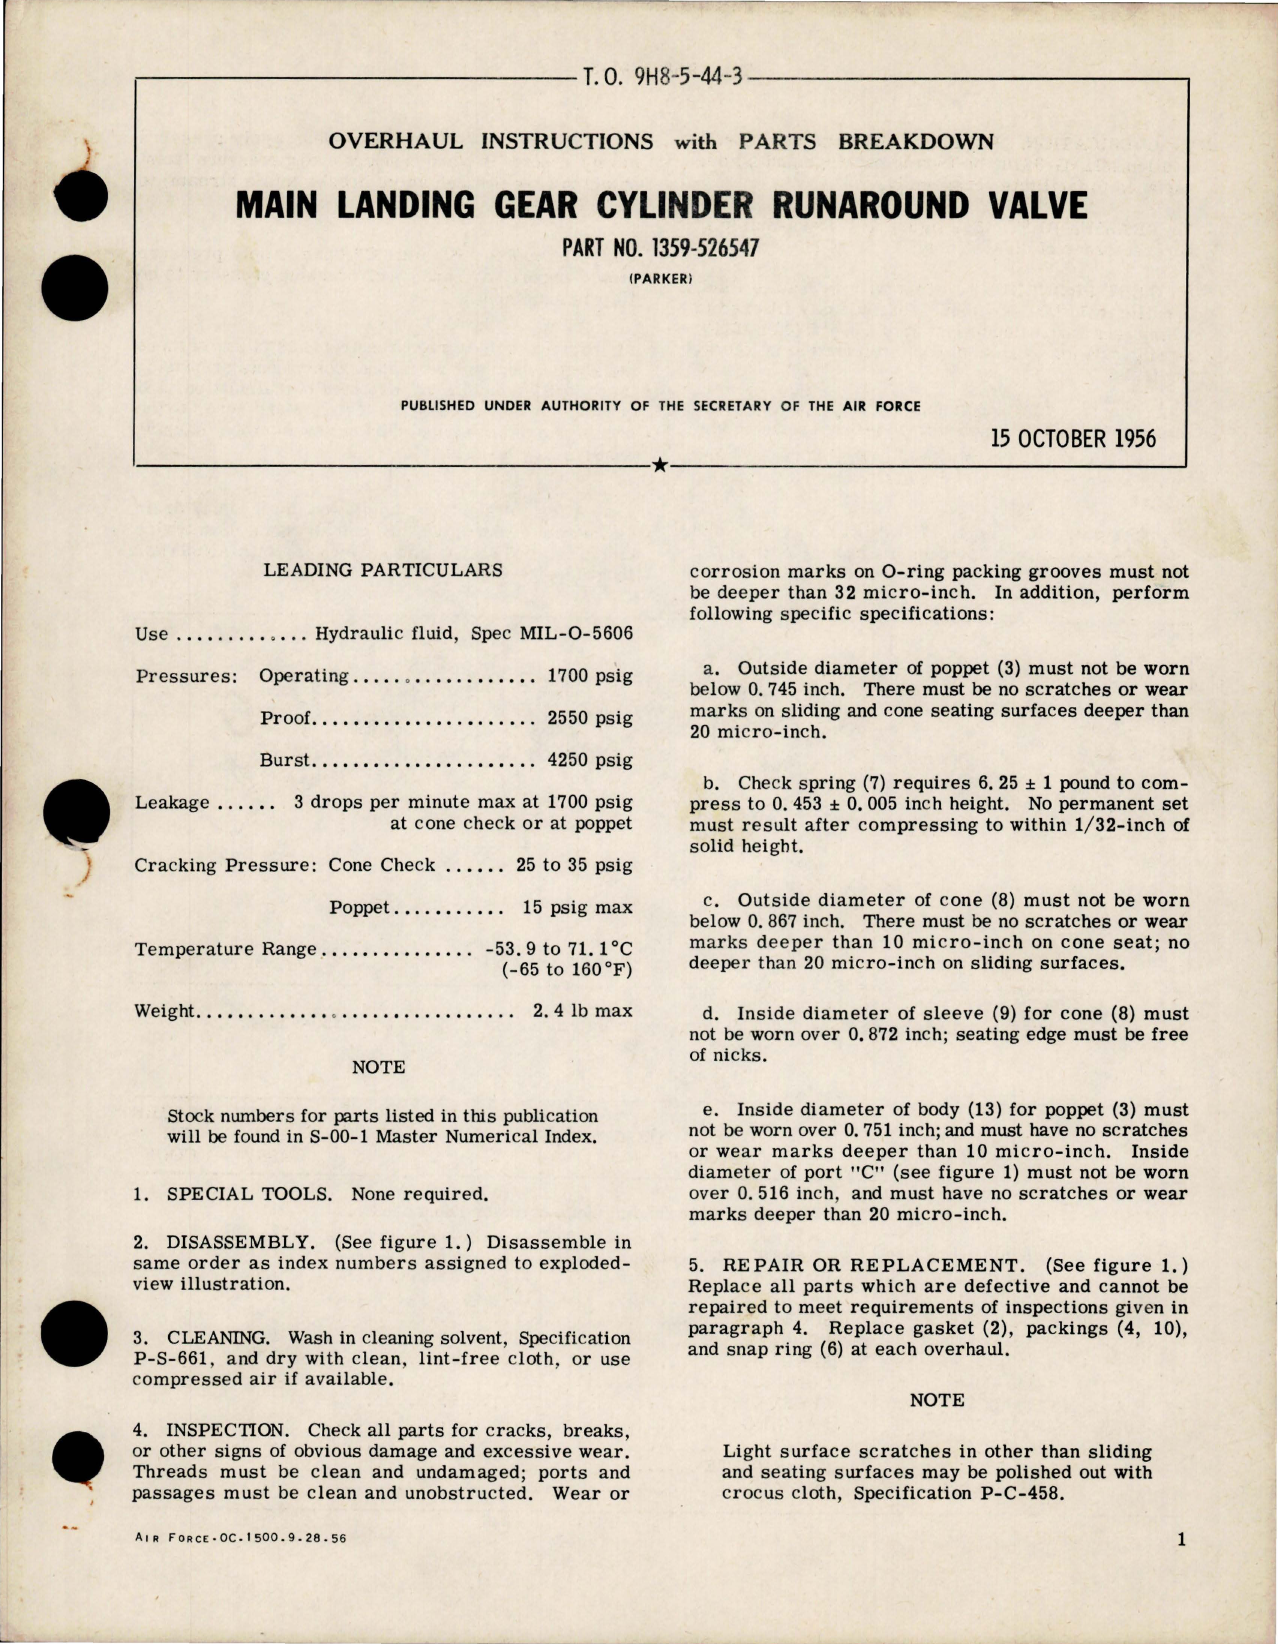 Sample page 1 from AirCorps Library document: Overhaul Instructions with Parts for Main Landing Gear Cylinder Runaround Valve - Part 1359-526547